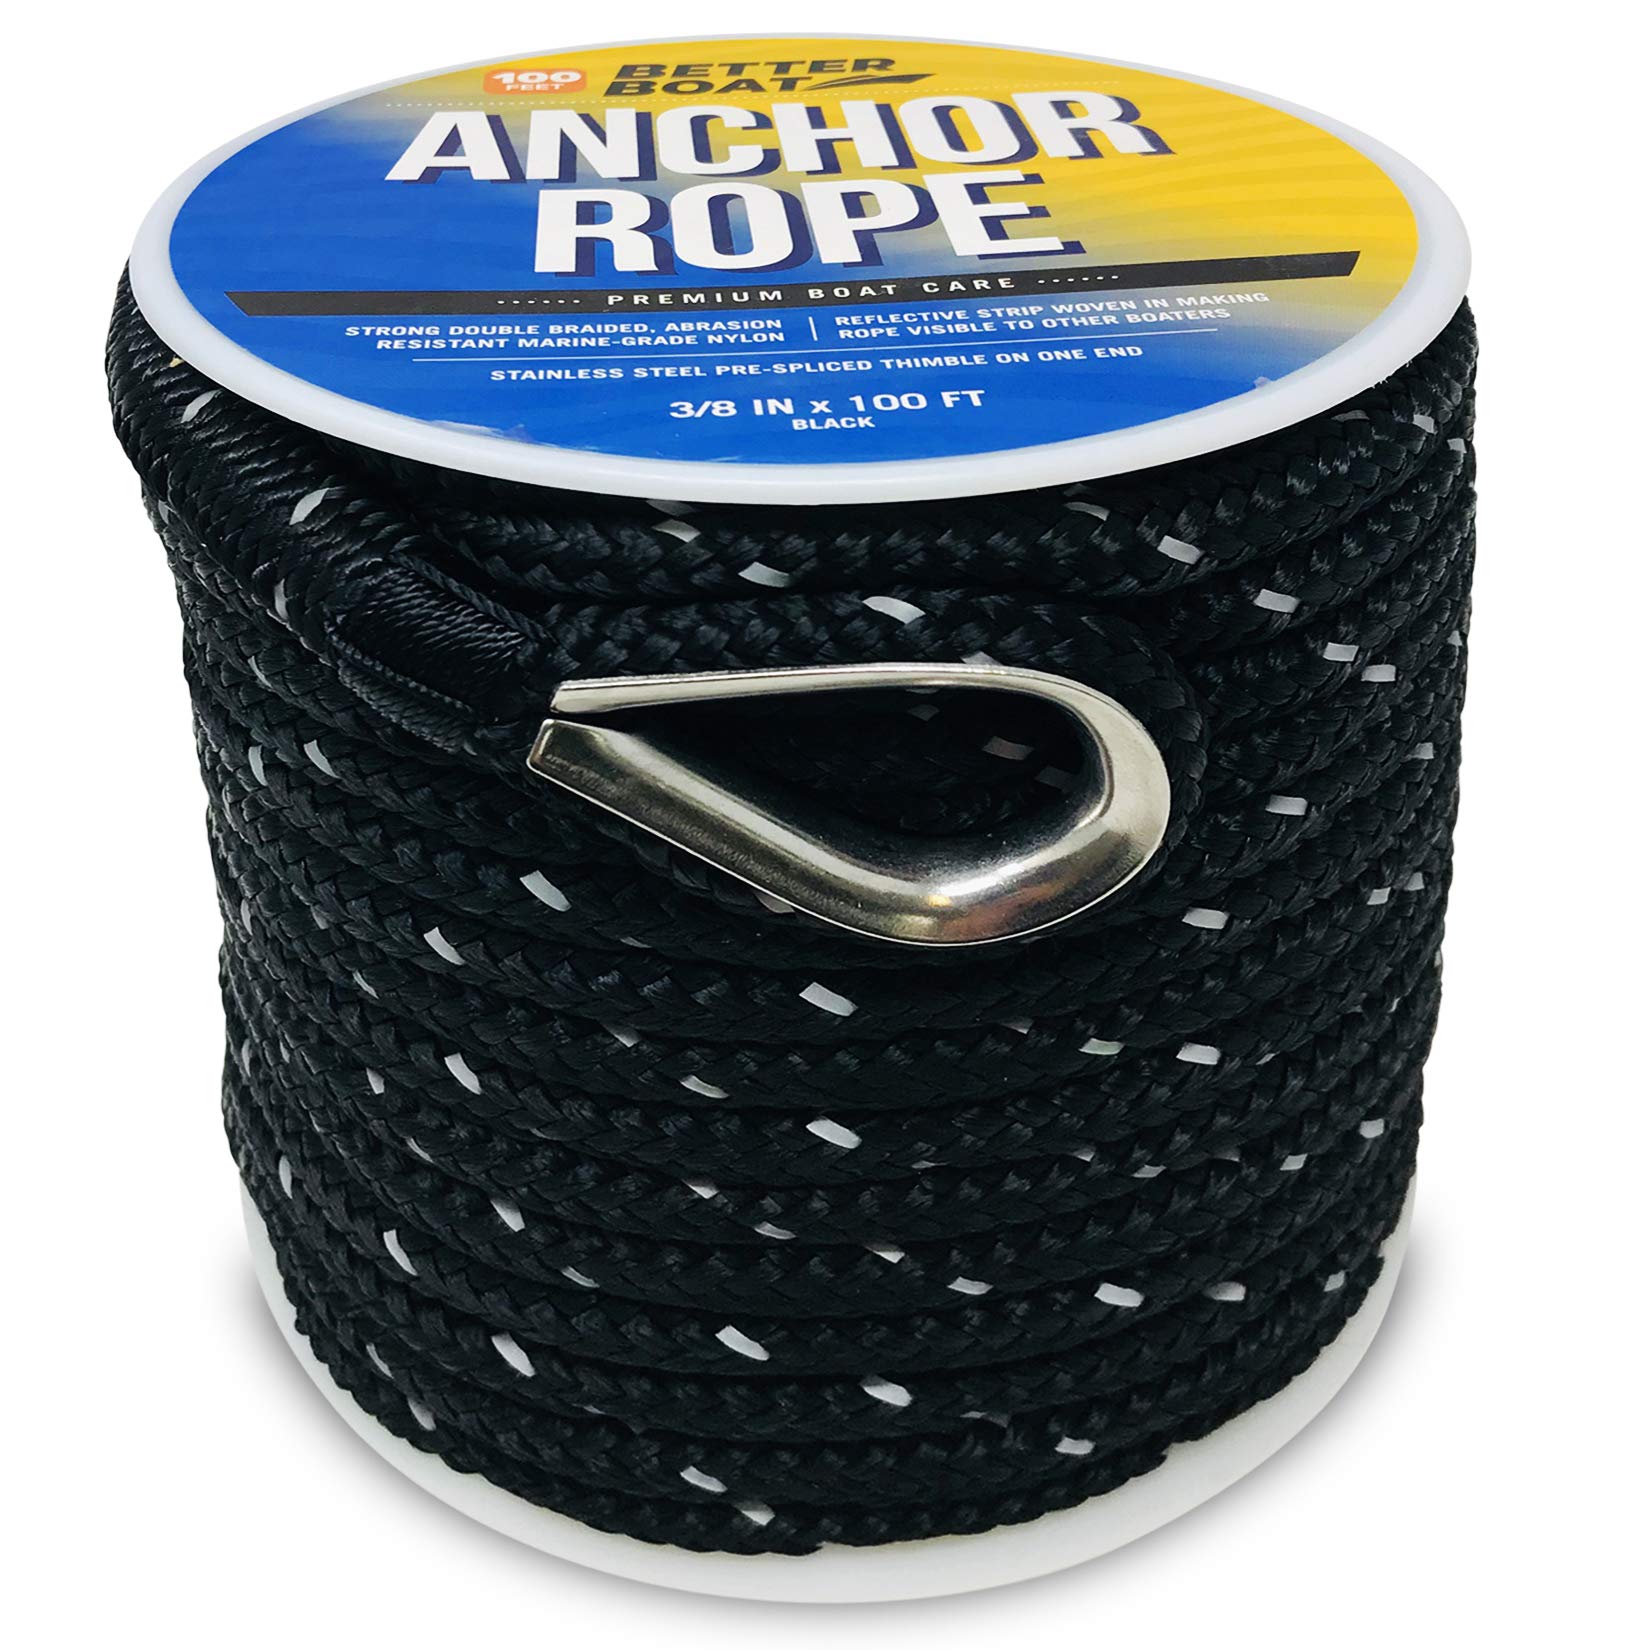 Premium Boat Anchor Rope 100 Ft Double Braided Boat Anchor Line Black Nylon  Marine Rope Braided 3/8 Anchor Rope Reel for Many Anchors & Boats 3/8 Inch  Black